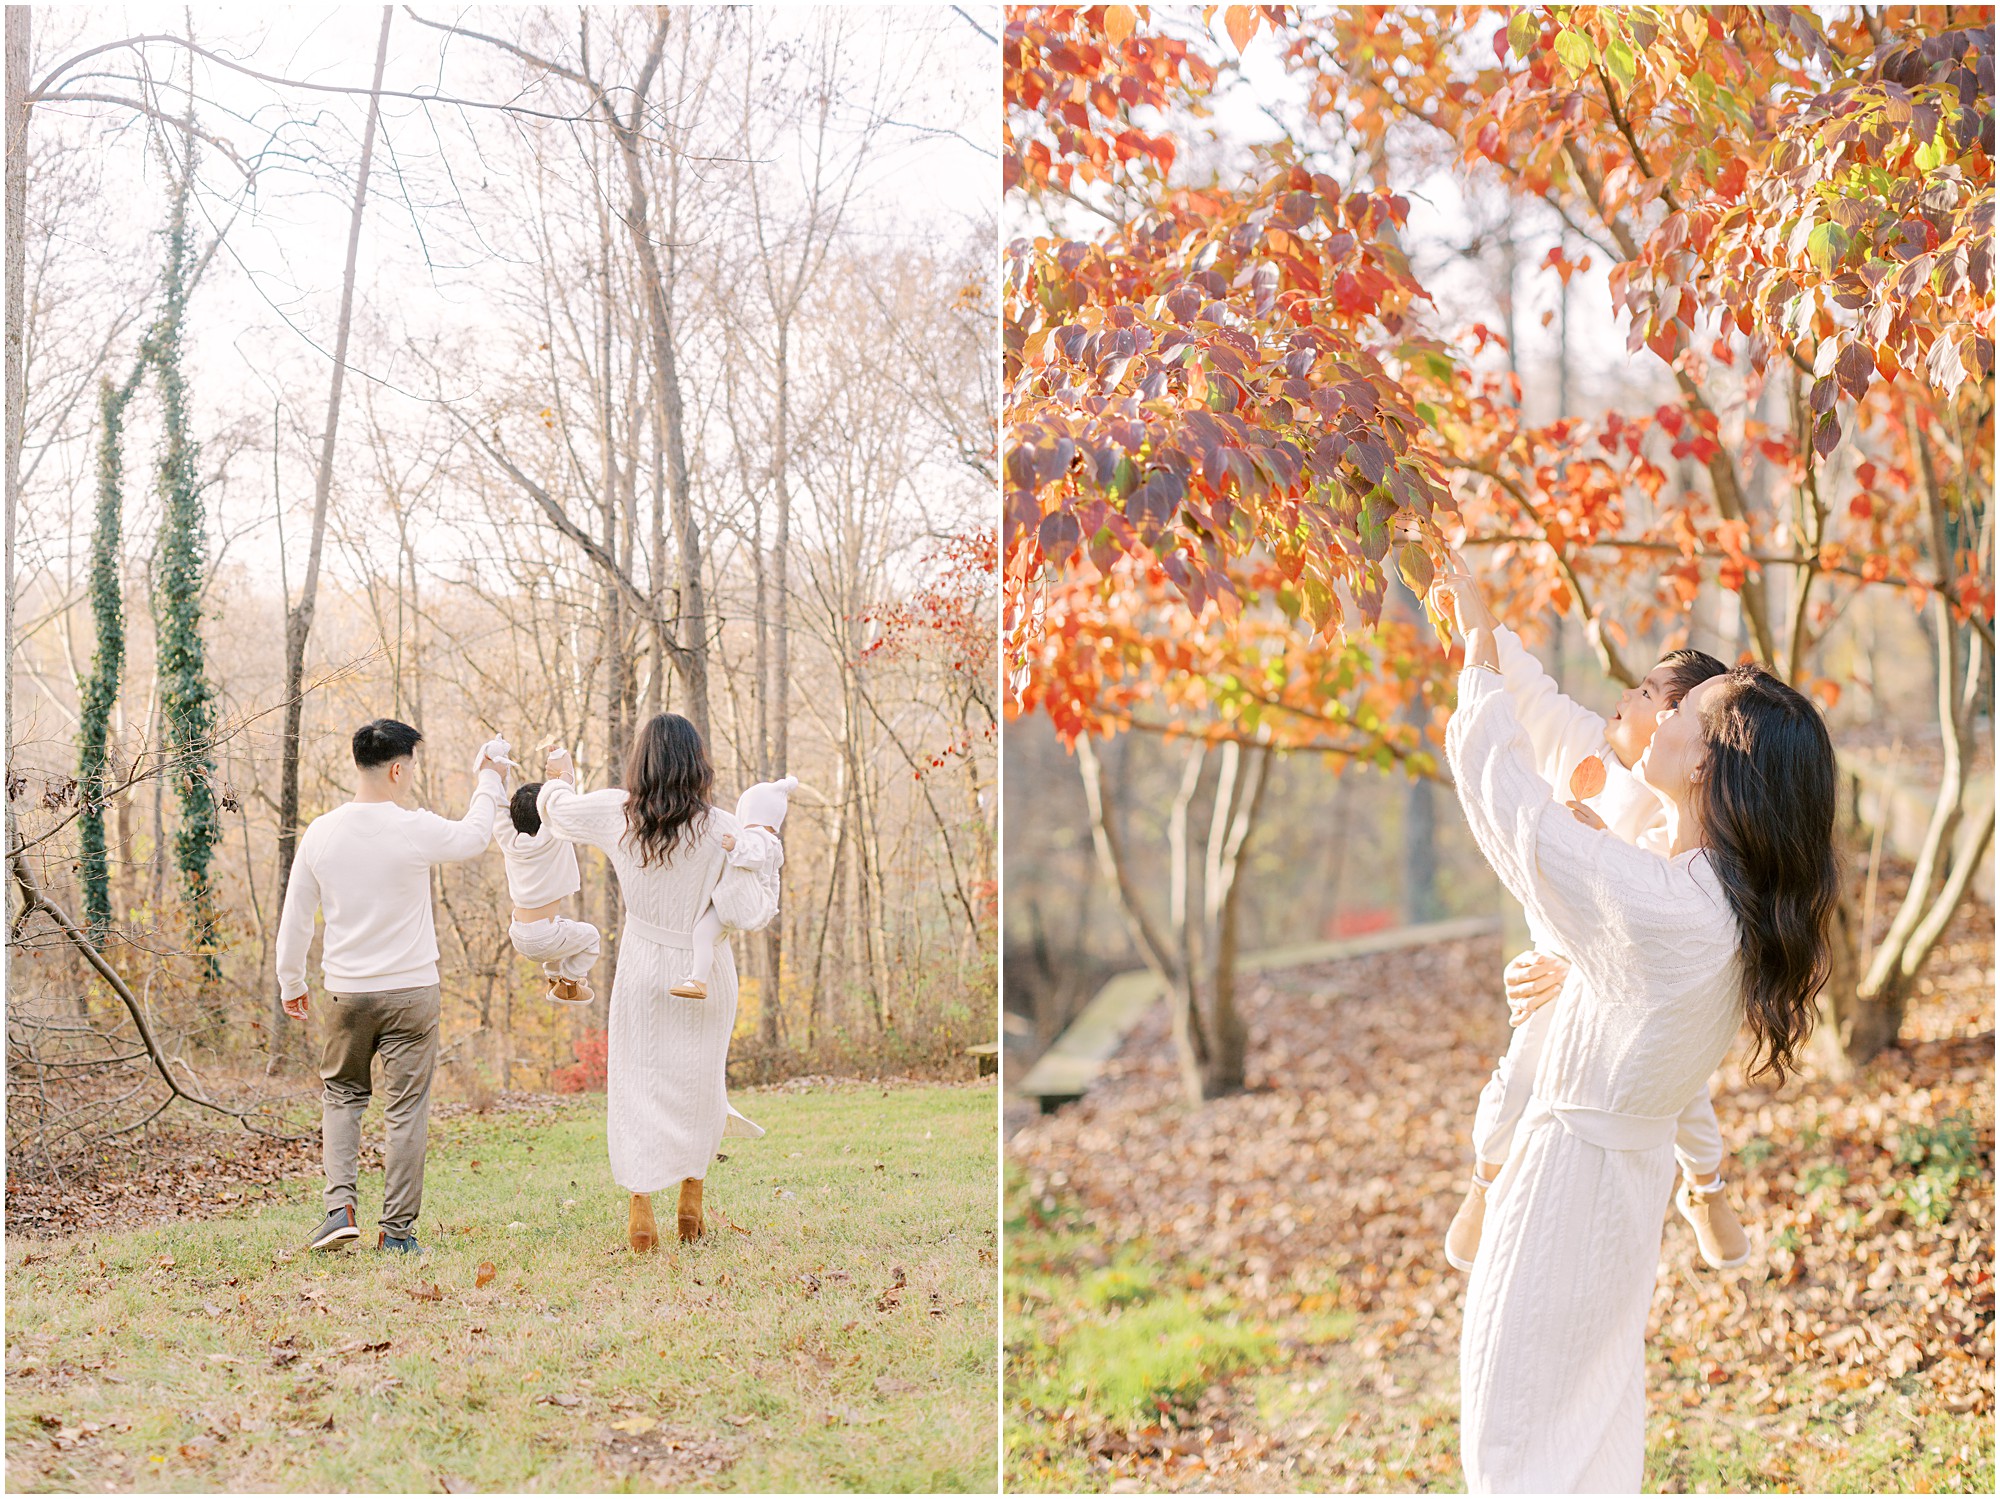 Parents swinging their toddler together and mama exploring the leaves with her son